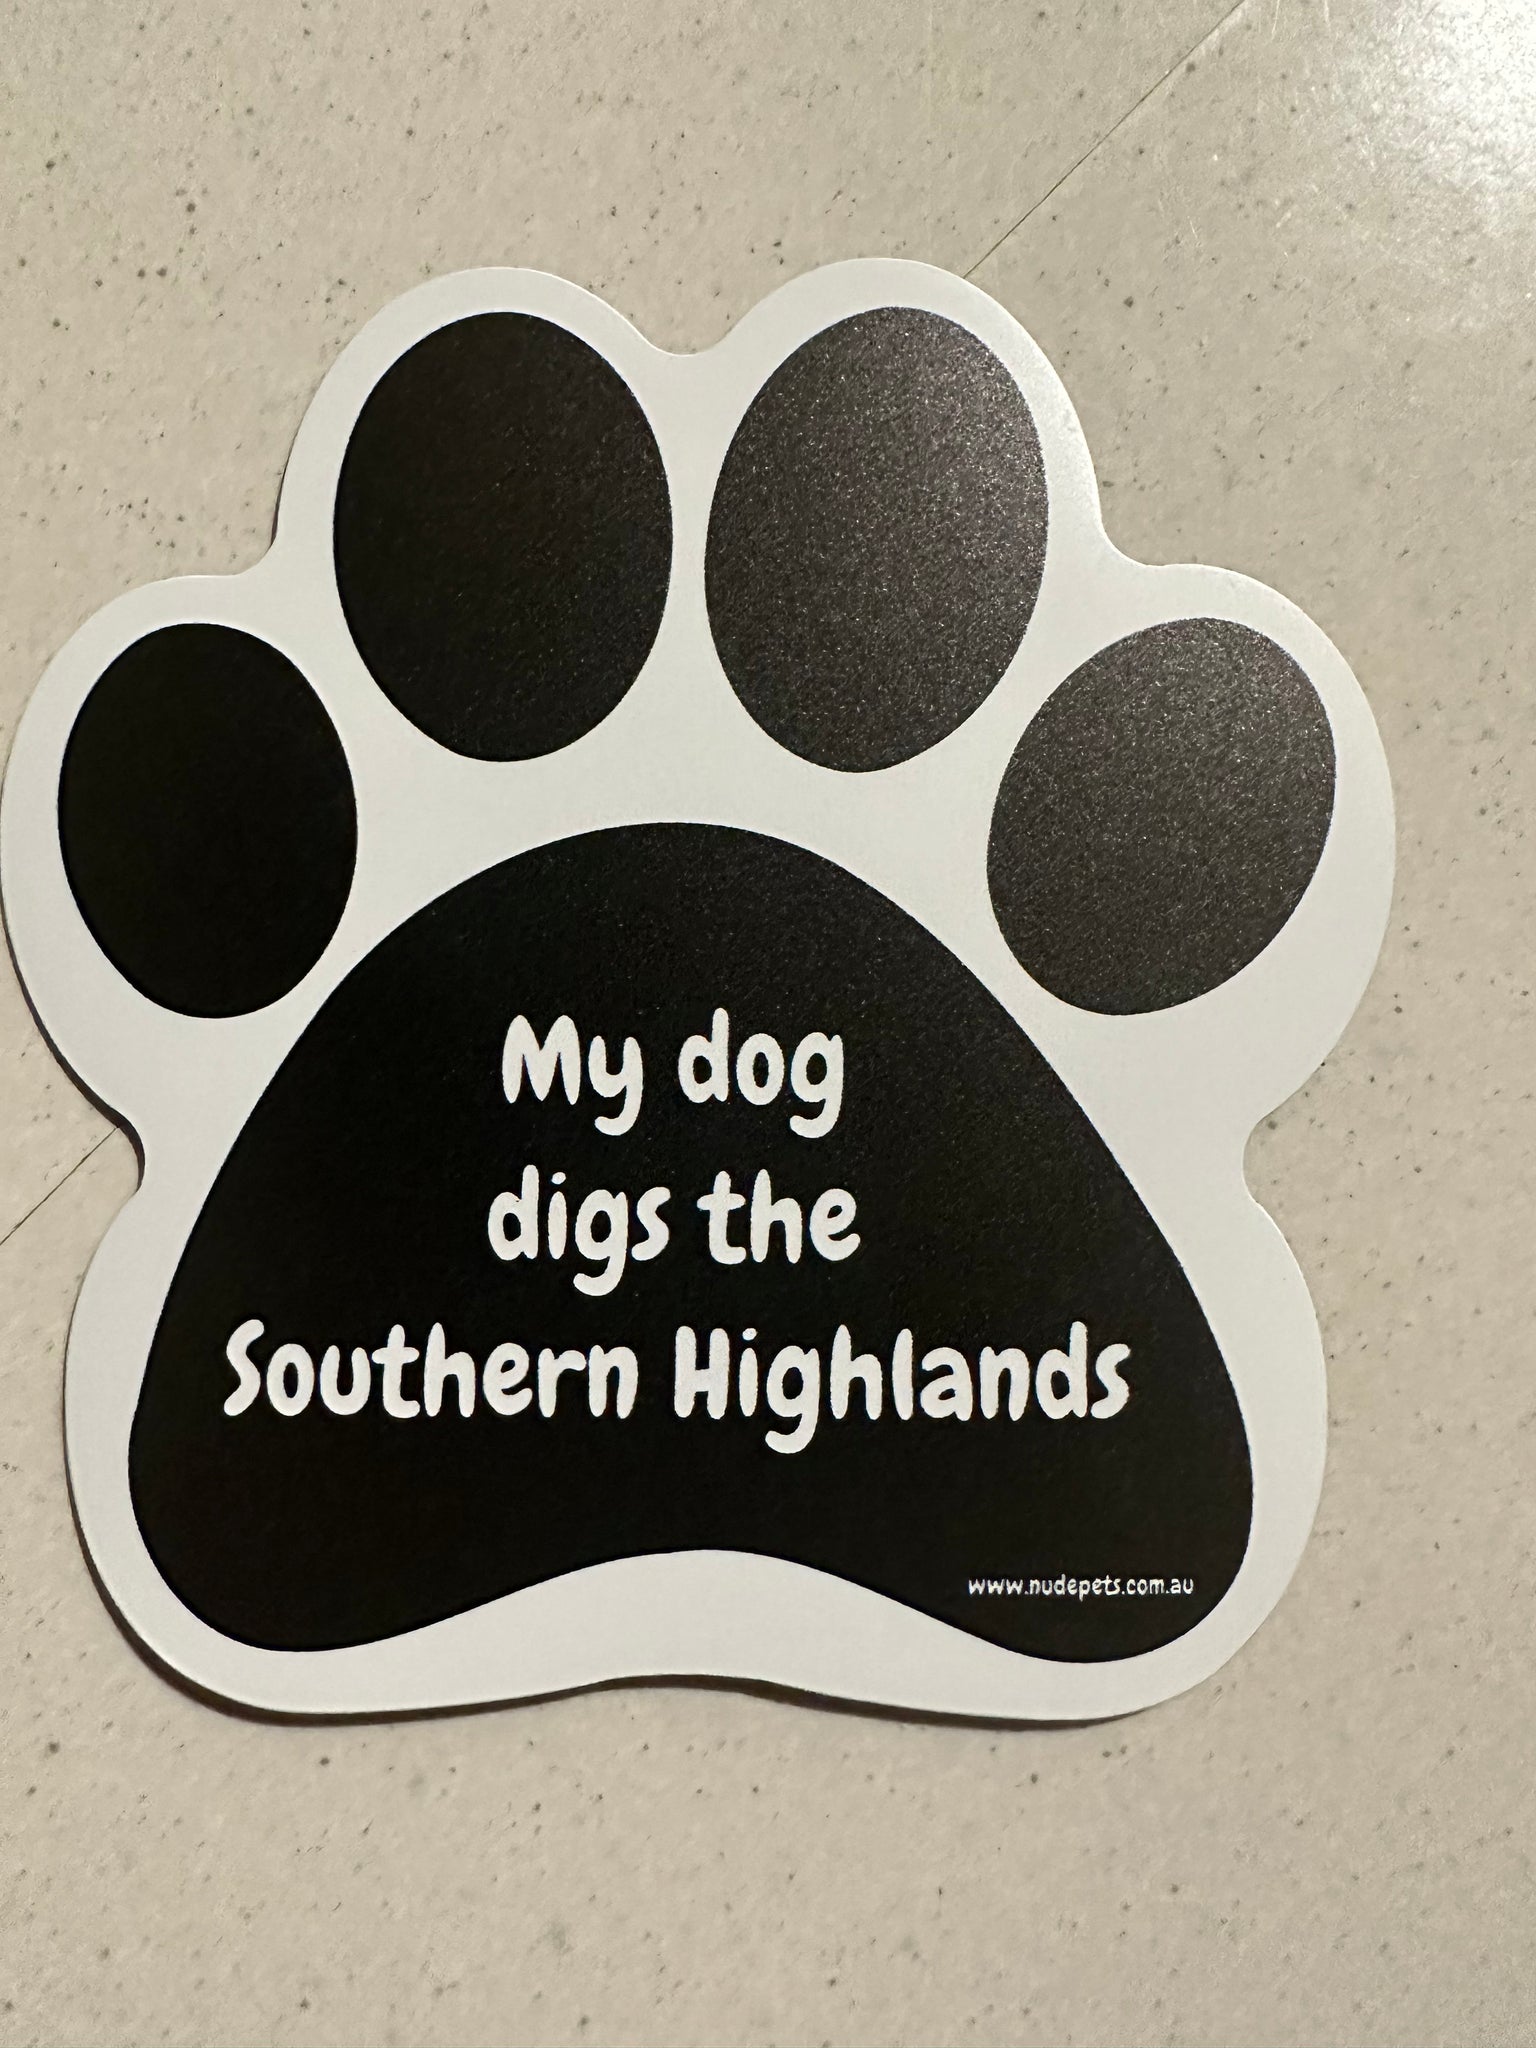 My dog digs the southern highlands - Car Magnet